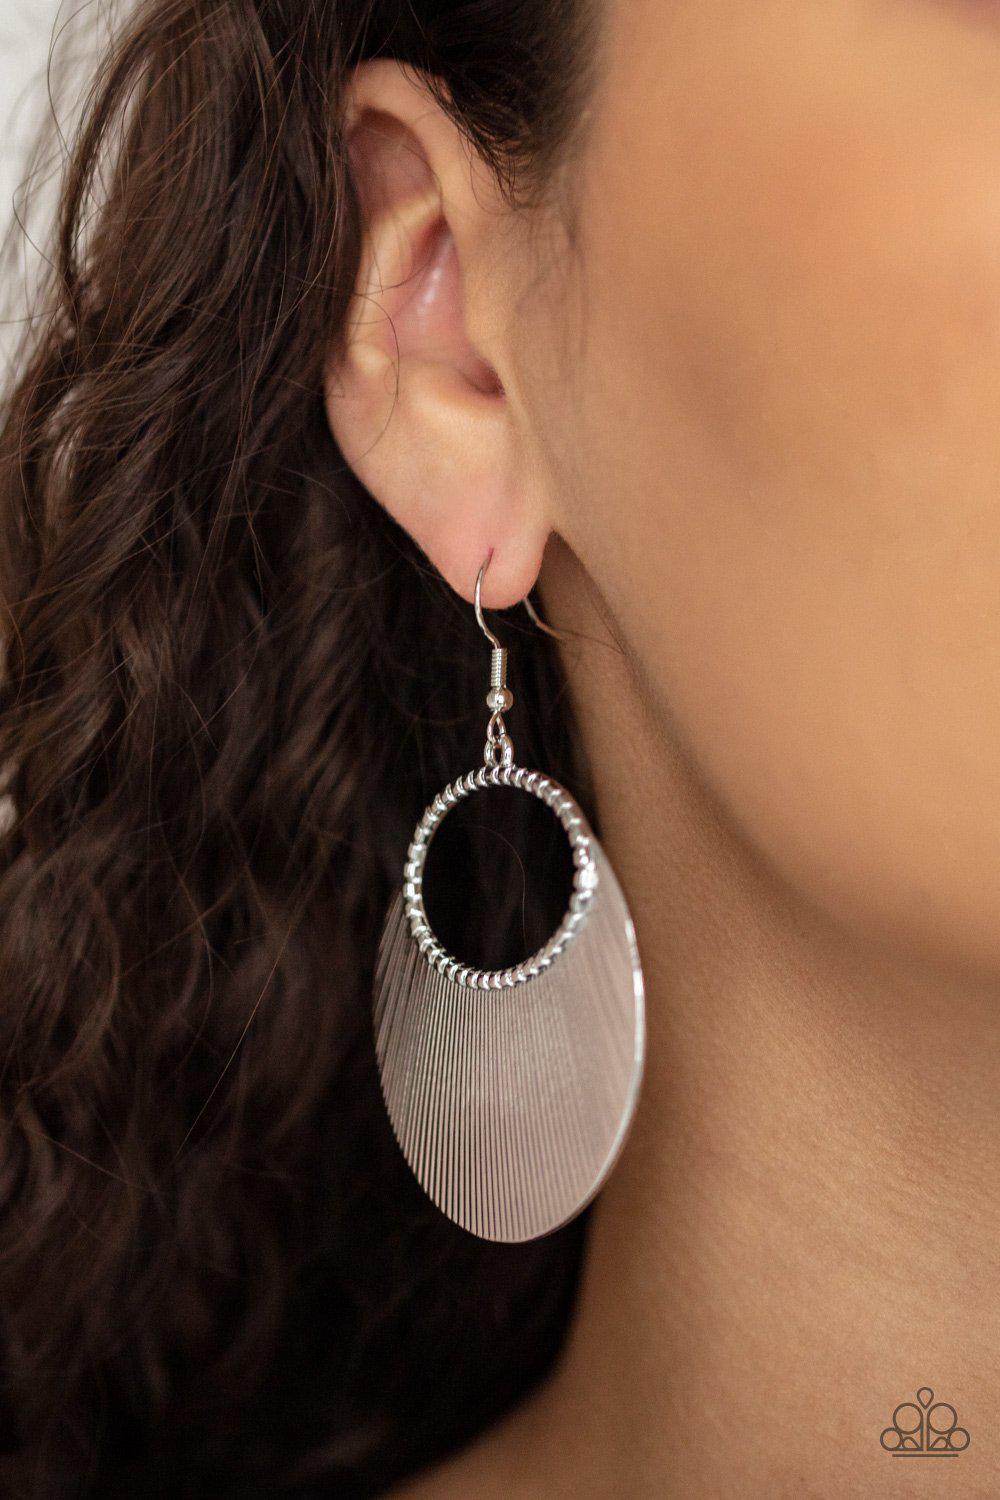 Fan Girl Glam Silver Earrings - Paparazzi Accessories- lightbox - CarasShop.com - $5 Jewelry by Cara Jewels